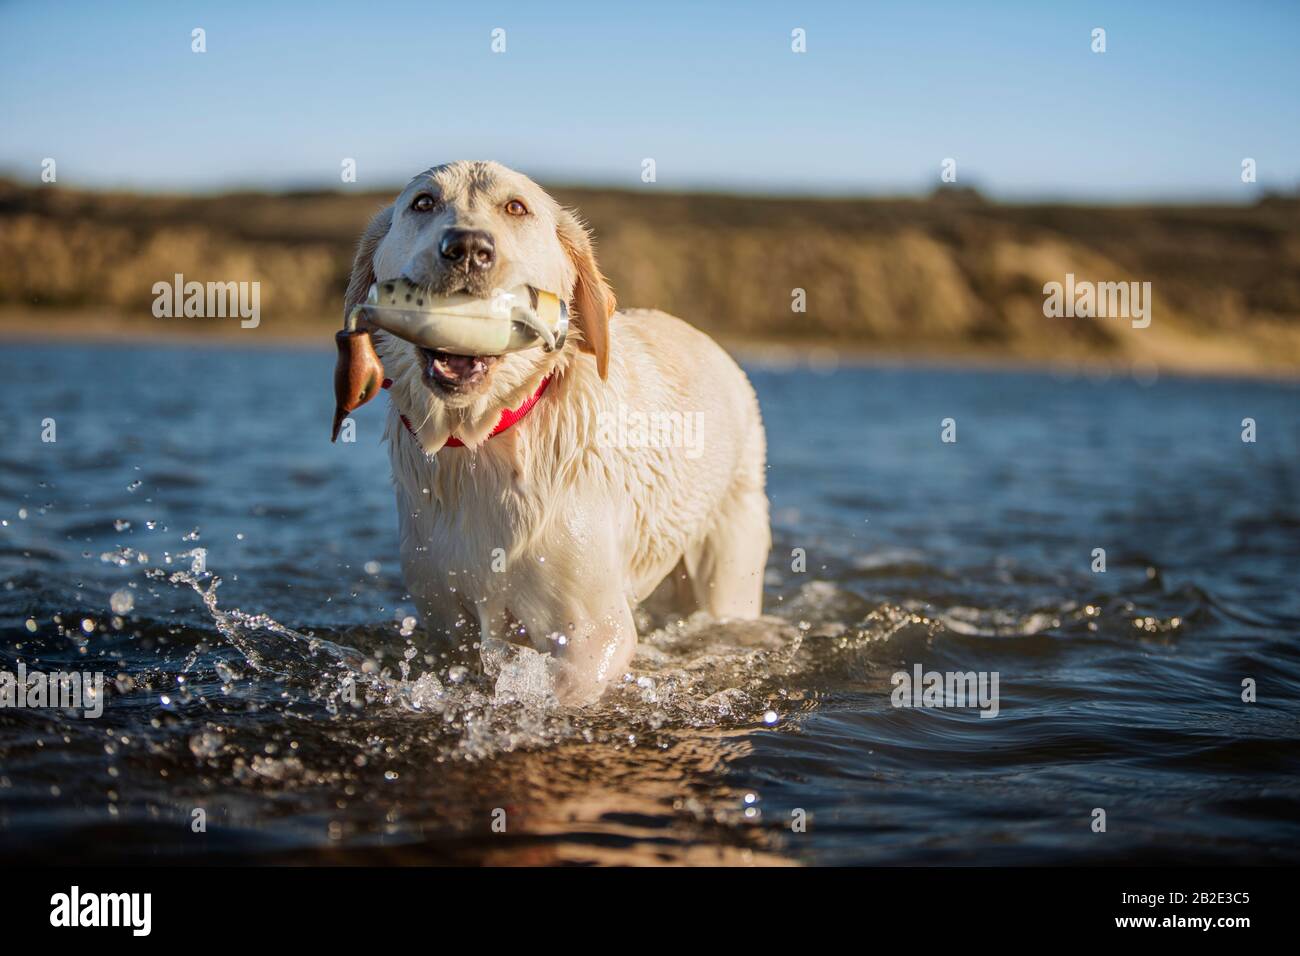 Golden labrador with duck decoy in its mouth Stock Photo